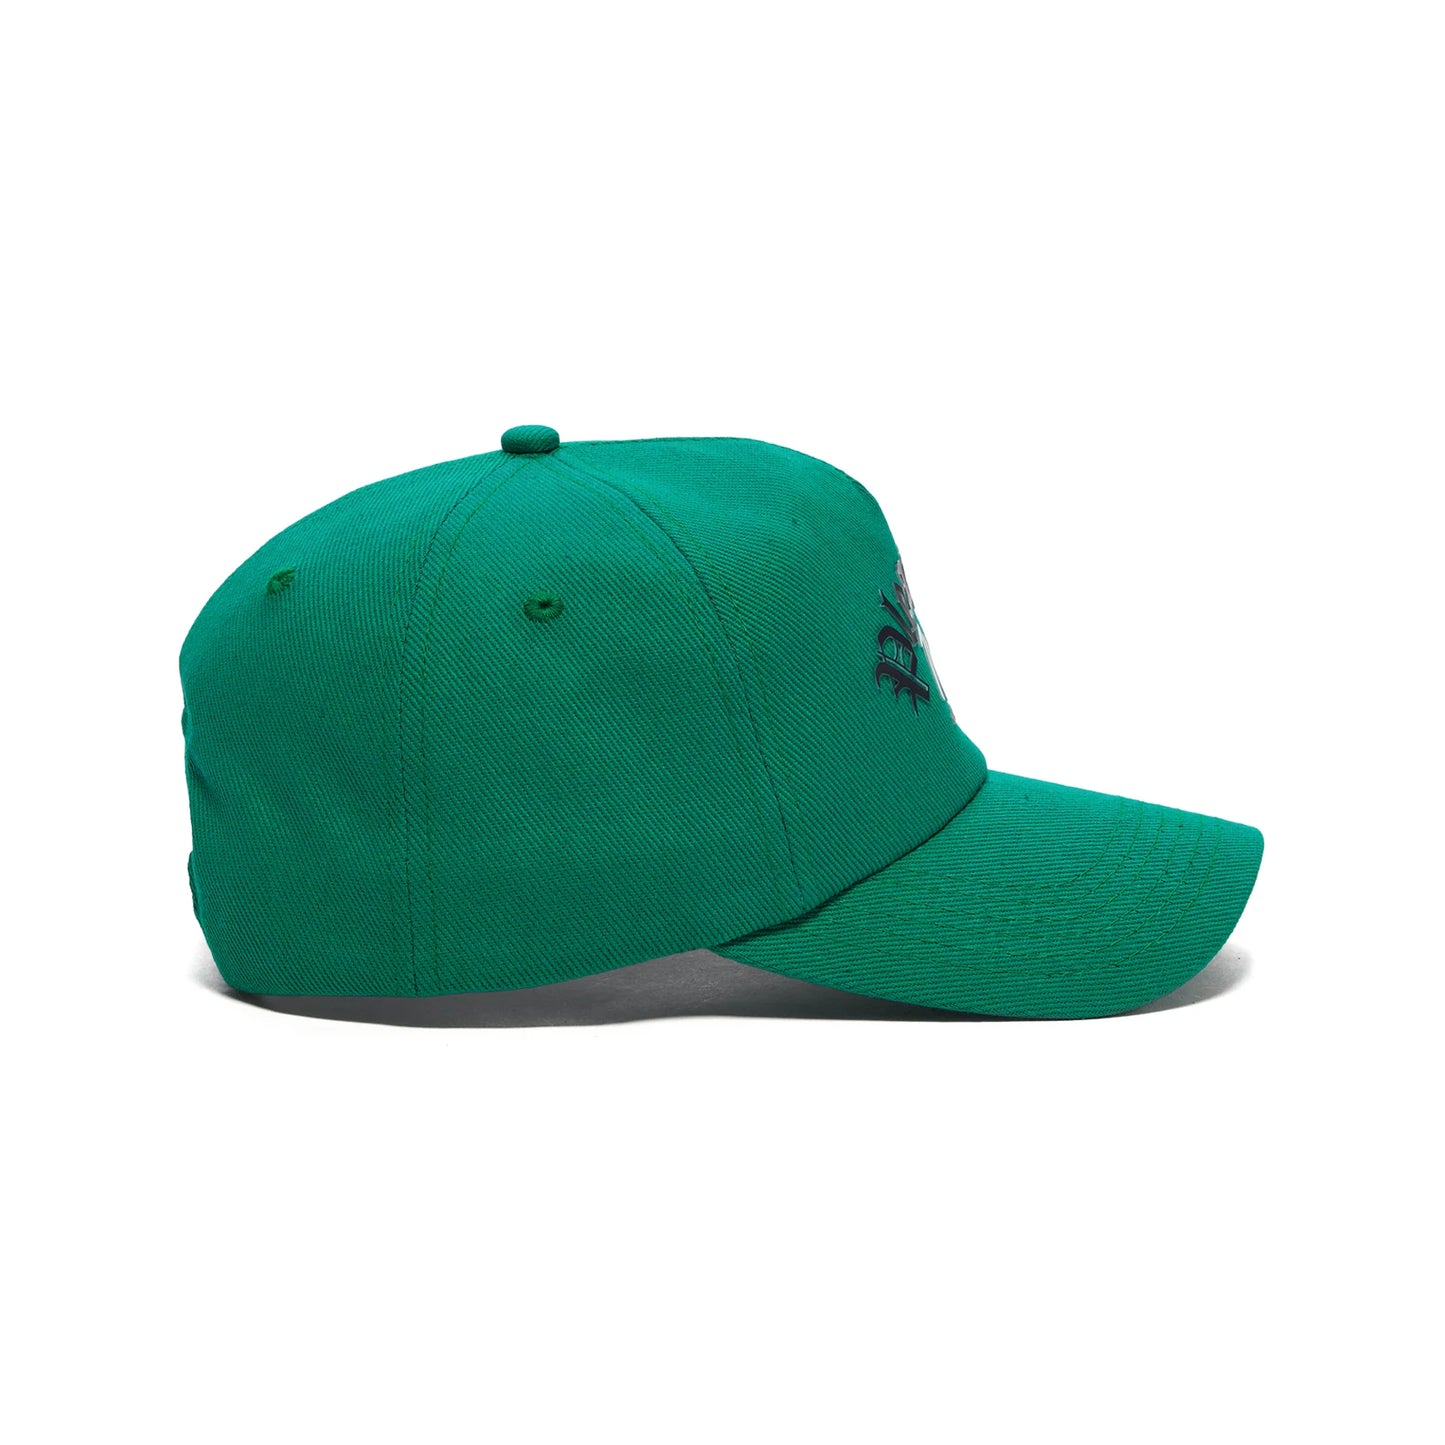 Pleasures "Appointment Unconstructed Snapback" - Green